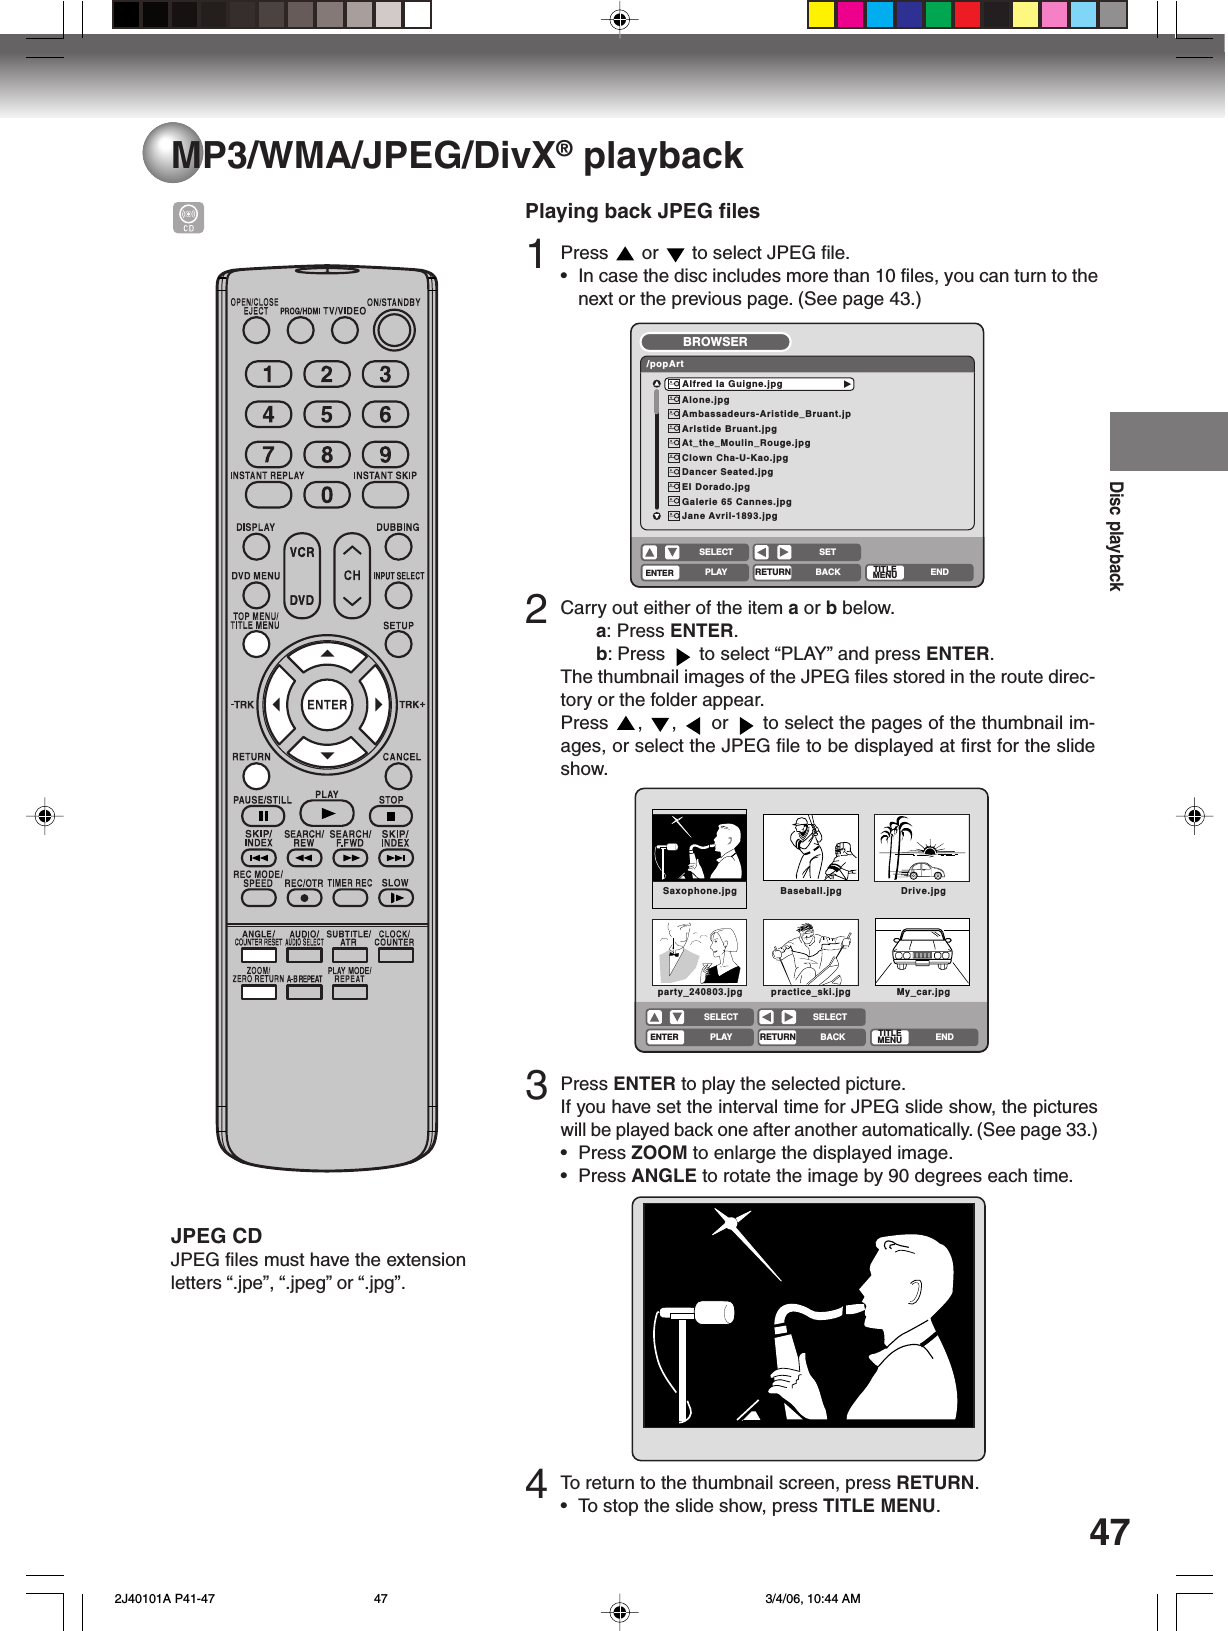 Disc playback47MP3/WMA/JPEG/DivX® playbackPlaying back JPEG files1Press   or   to select JPEG file.•In case the disc includes more than 10 files, you can turn to thenext or the previous page. (See page 43.)2Carry out either of the item a or b below.a: Press ENTER.b: Press   to select “PLAY” and press ENTER.The thumbnail images of the JPEG files stored in the route direc-tory or the folder appear.Press  ,  ,   or   to select the pages of the thumbnail im-ages, or select the JPEG file to be displayed at first for the slideshow.3Press ENTER to play the selected picture.If you have set the interval time for JPEG slide show, the pictureswill be played back one after another automatically. (See page 33.)• Press ZOOM to enlarge the displayed image.• Press ANGLE to rotate the image by 90 degrees each time.Alone.jpgAmbassadeurs-Aristide_Bruant.jpArlstide Bruant.jpgAt_the_Moulin_Rouge.jpgClown Cha-U-Kao.jpgDancer Seated.jpgEI Dorado.jpgGalerie 65 Cannes.jpgJane Avril-1893.jpgAlfred Ia Guigne.jpg/popArtBROWSERENTERRETURNPLAY BACKSETENDSELECTTITLEMENUSaxophone.jpg Baseball.jpg Drive.jpgparty_240803.jpg practice_ski.jpg My_car.jpgENTERRETURNPLAY BACK ENDSELECT SELECTTITLEMENUJPEG CDJPEG files must have the extensionletters “.jpe”, “.jpeg” or “.jpg”.4To  return to the thumbnail screen, press RETURN.•To stop the slide show, press TITLE MENU. 2J40101A P41-47 3/4/06, 10:44 AM47